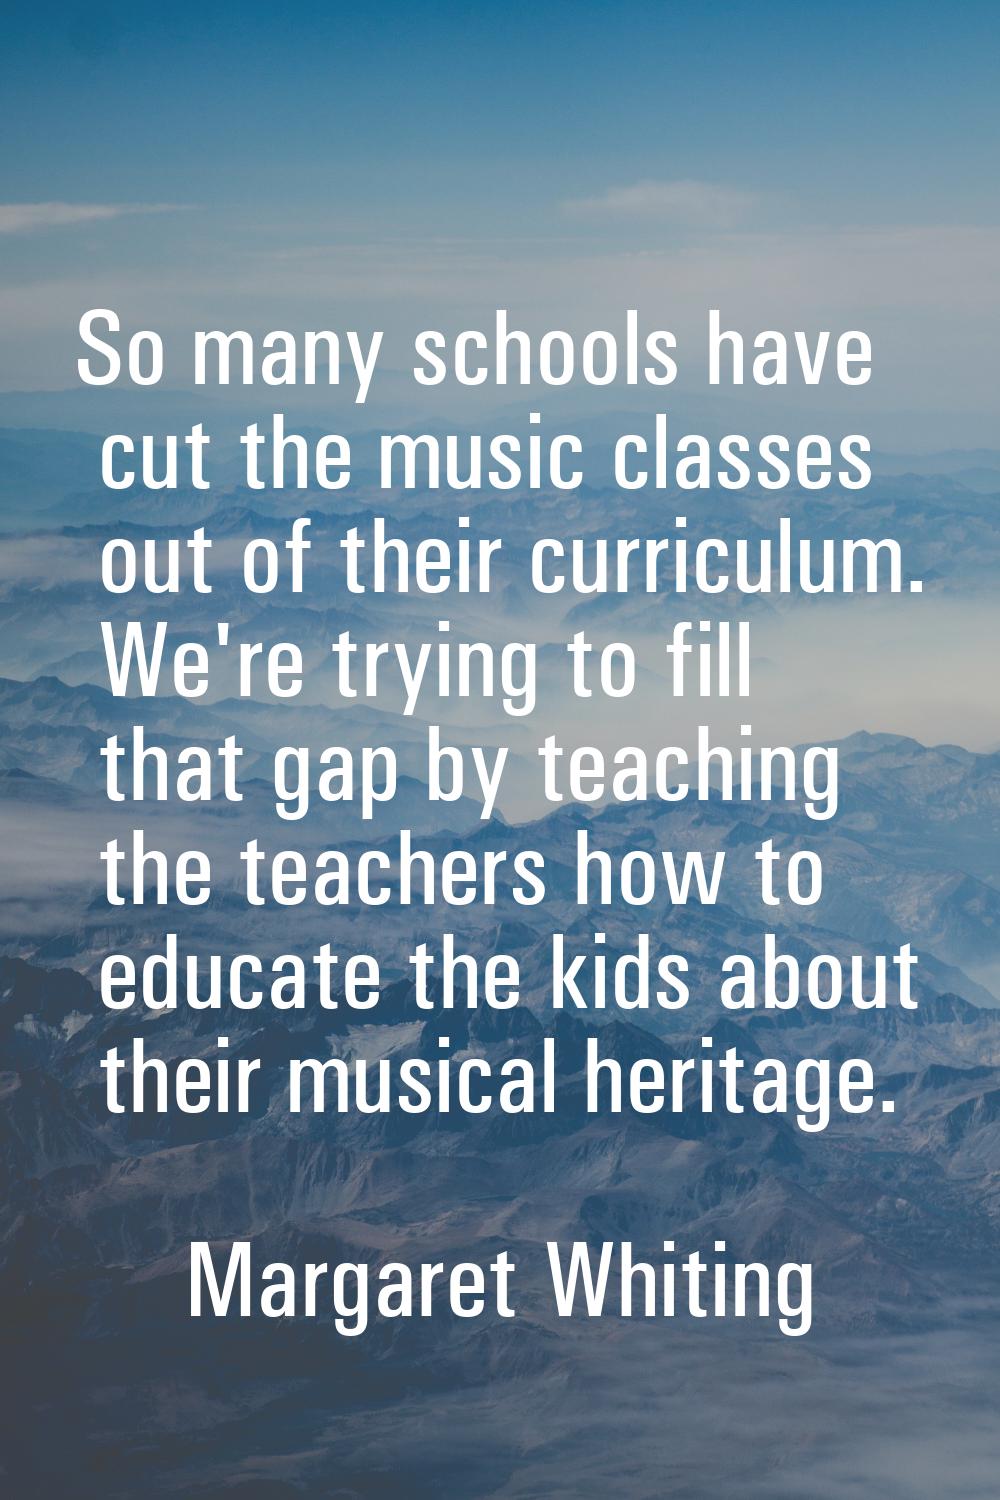 So many schools have cut the music classes out of their curriculum. We're trying to fill that gap b